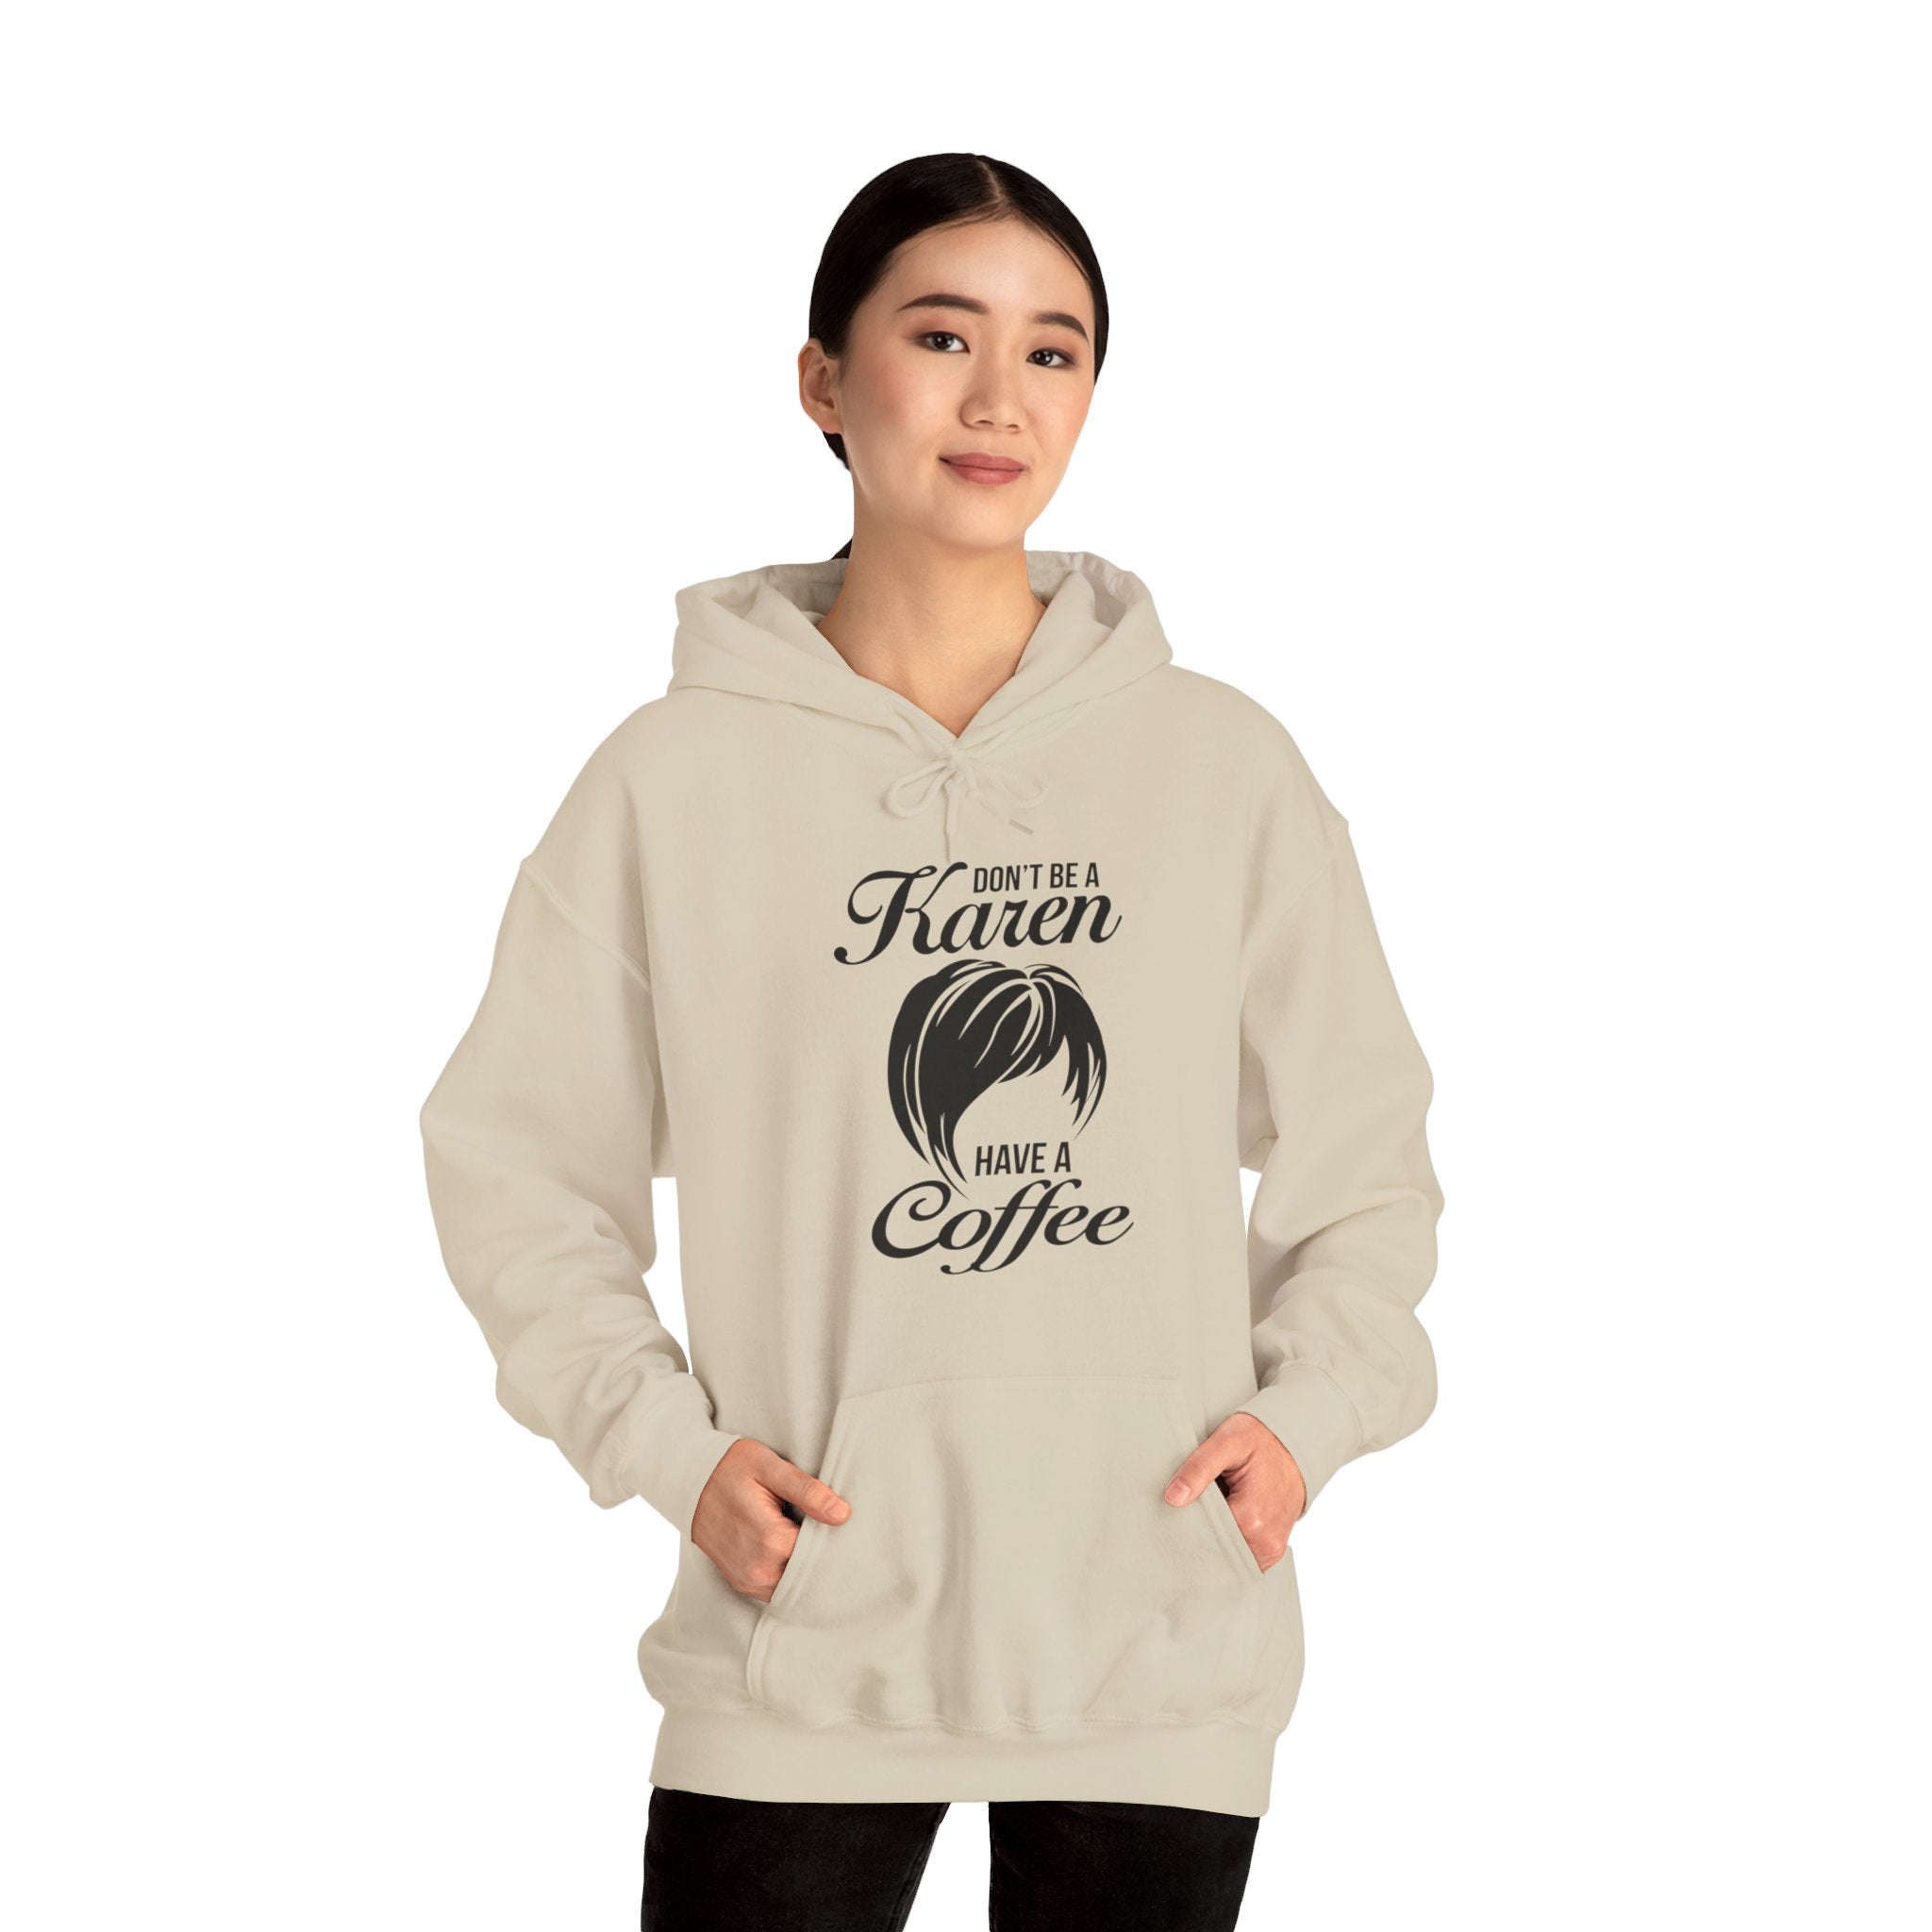 Don't Be A Karen Hoodie [PERFECT for grouchy friends]